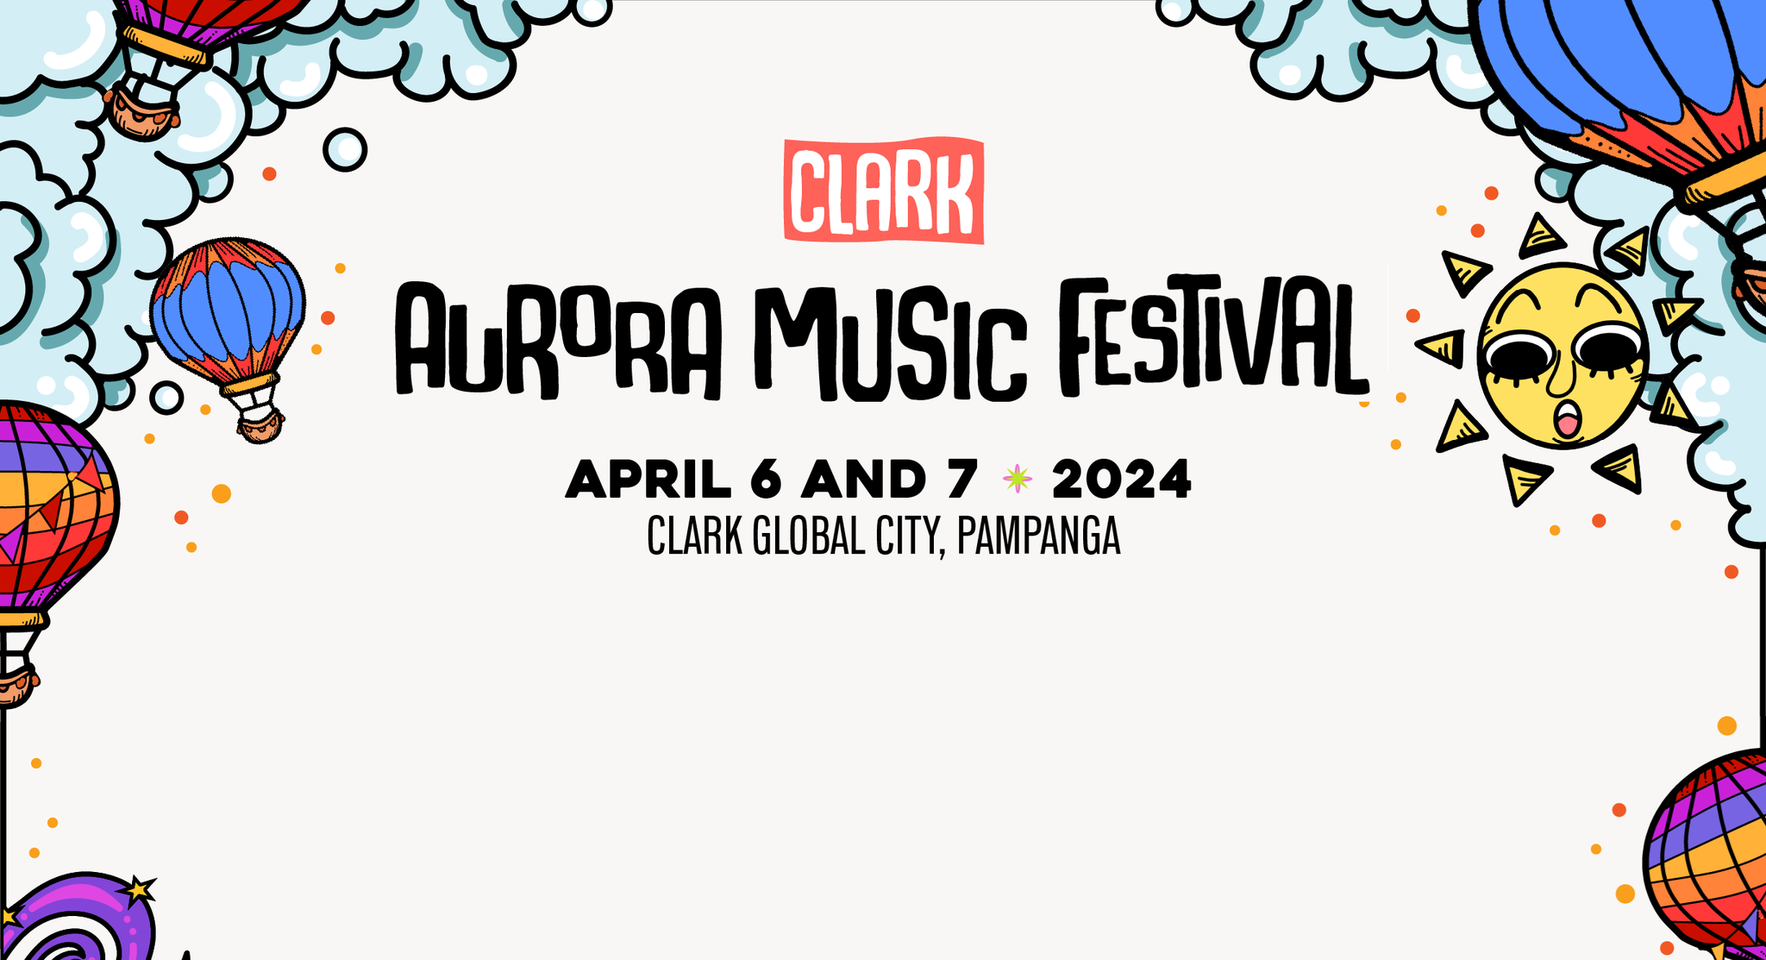 Get Ready for another 2 day Aurora Music Festival Clark